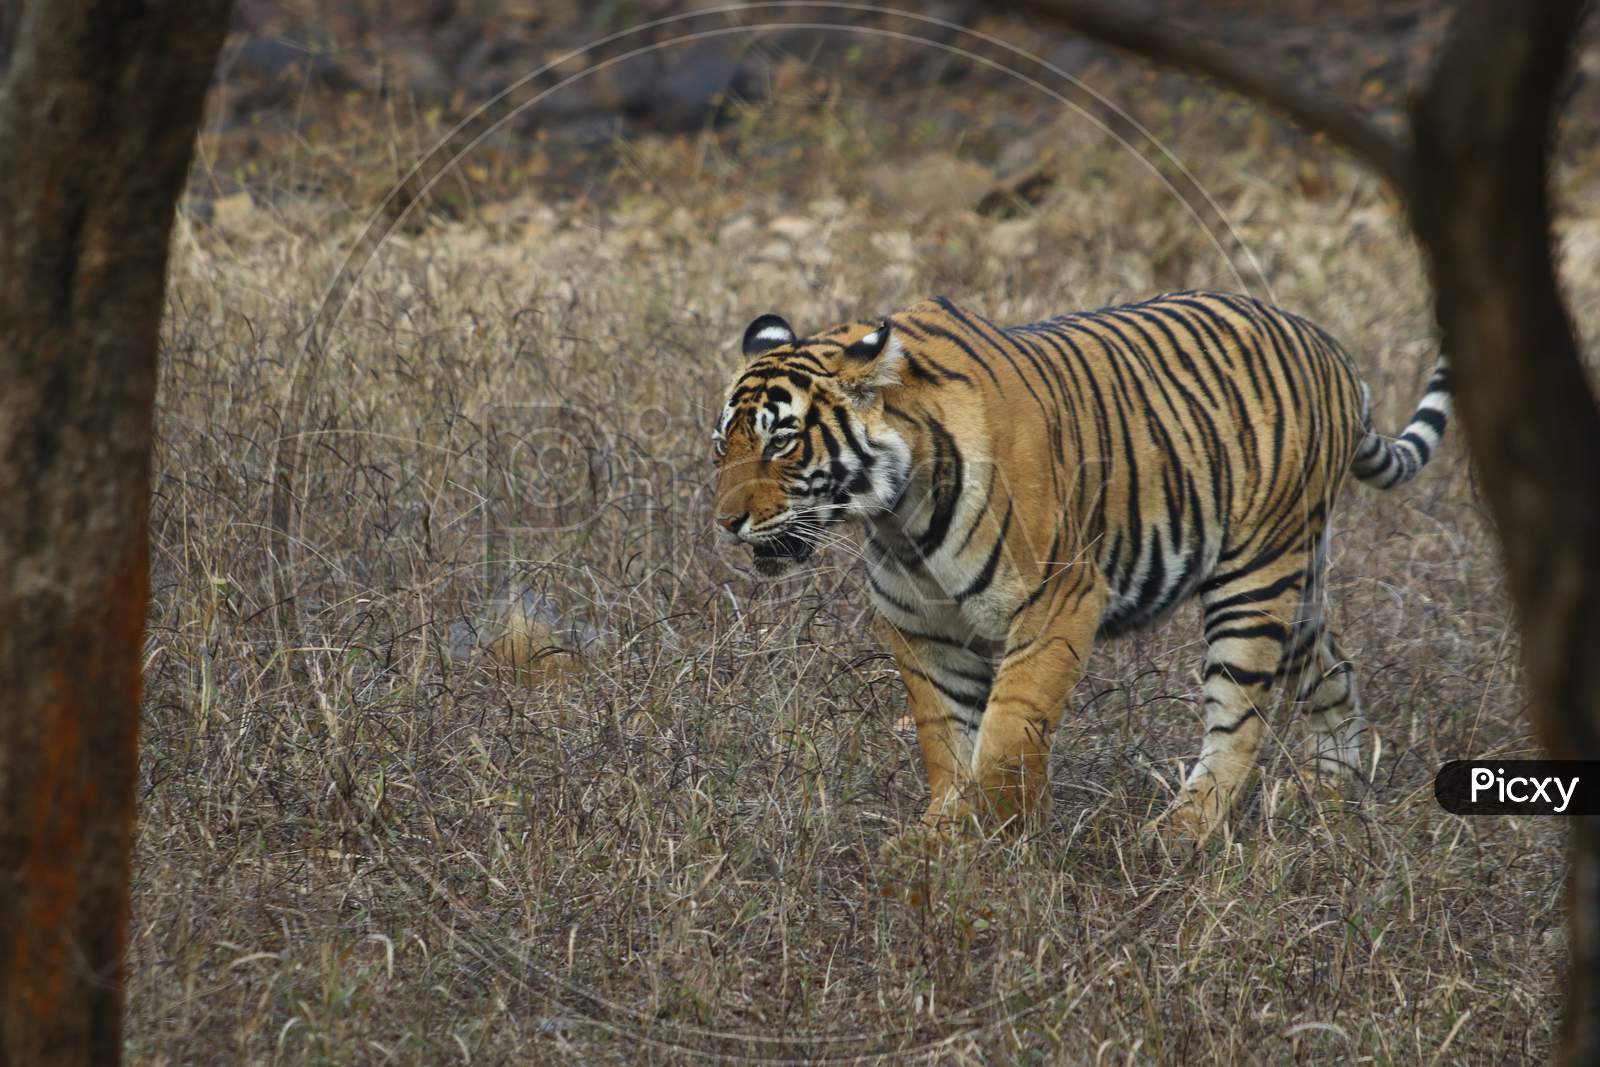 Tiger in The Woods  At The Ranthambore National Park In Rajasthan, India On 9 Feb 2020.